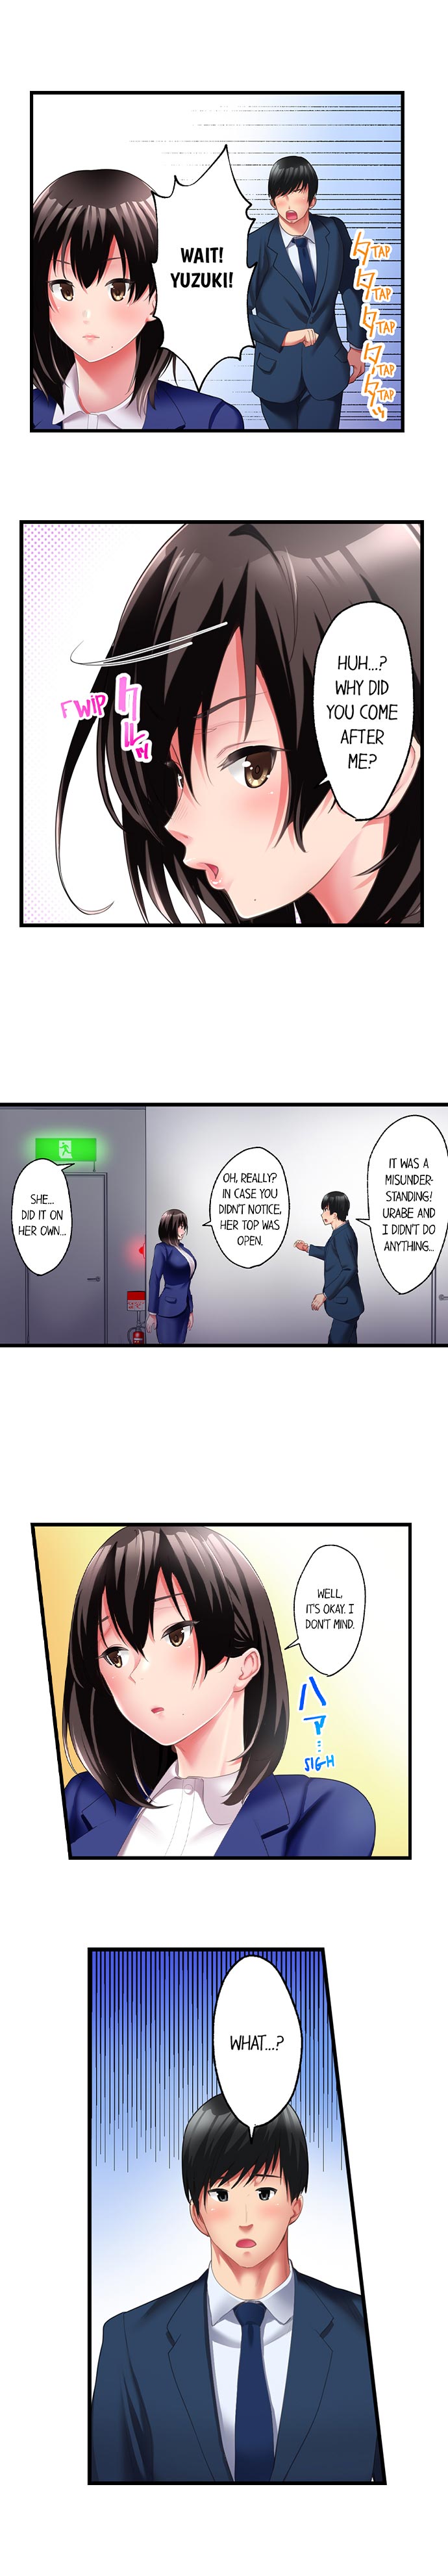 #Busted by my Co-Worker - Chapter 16 Page 4